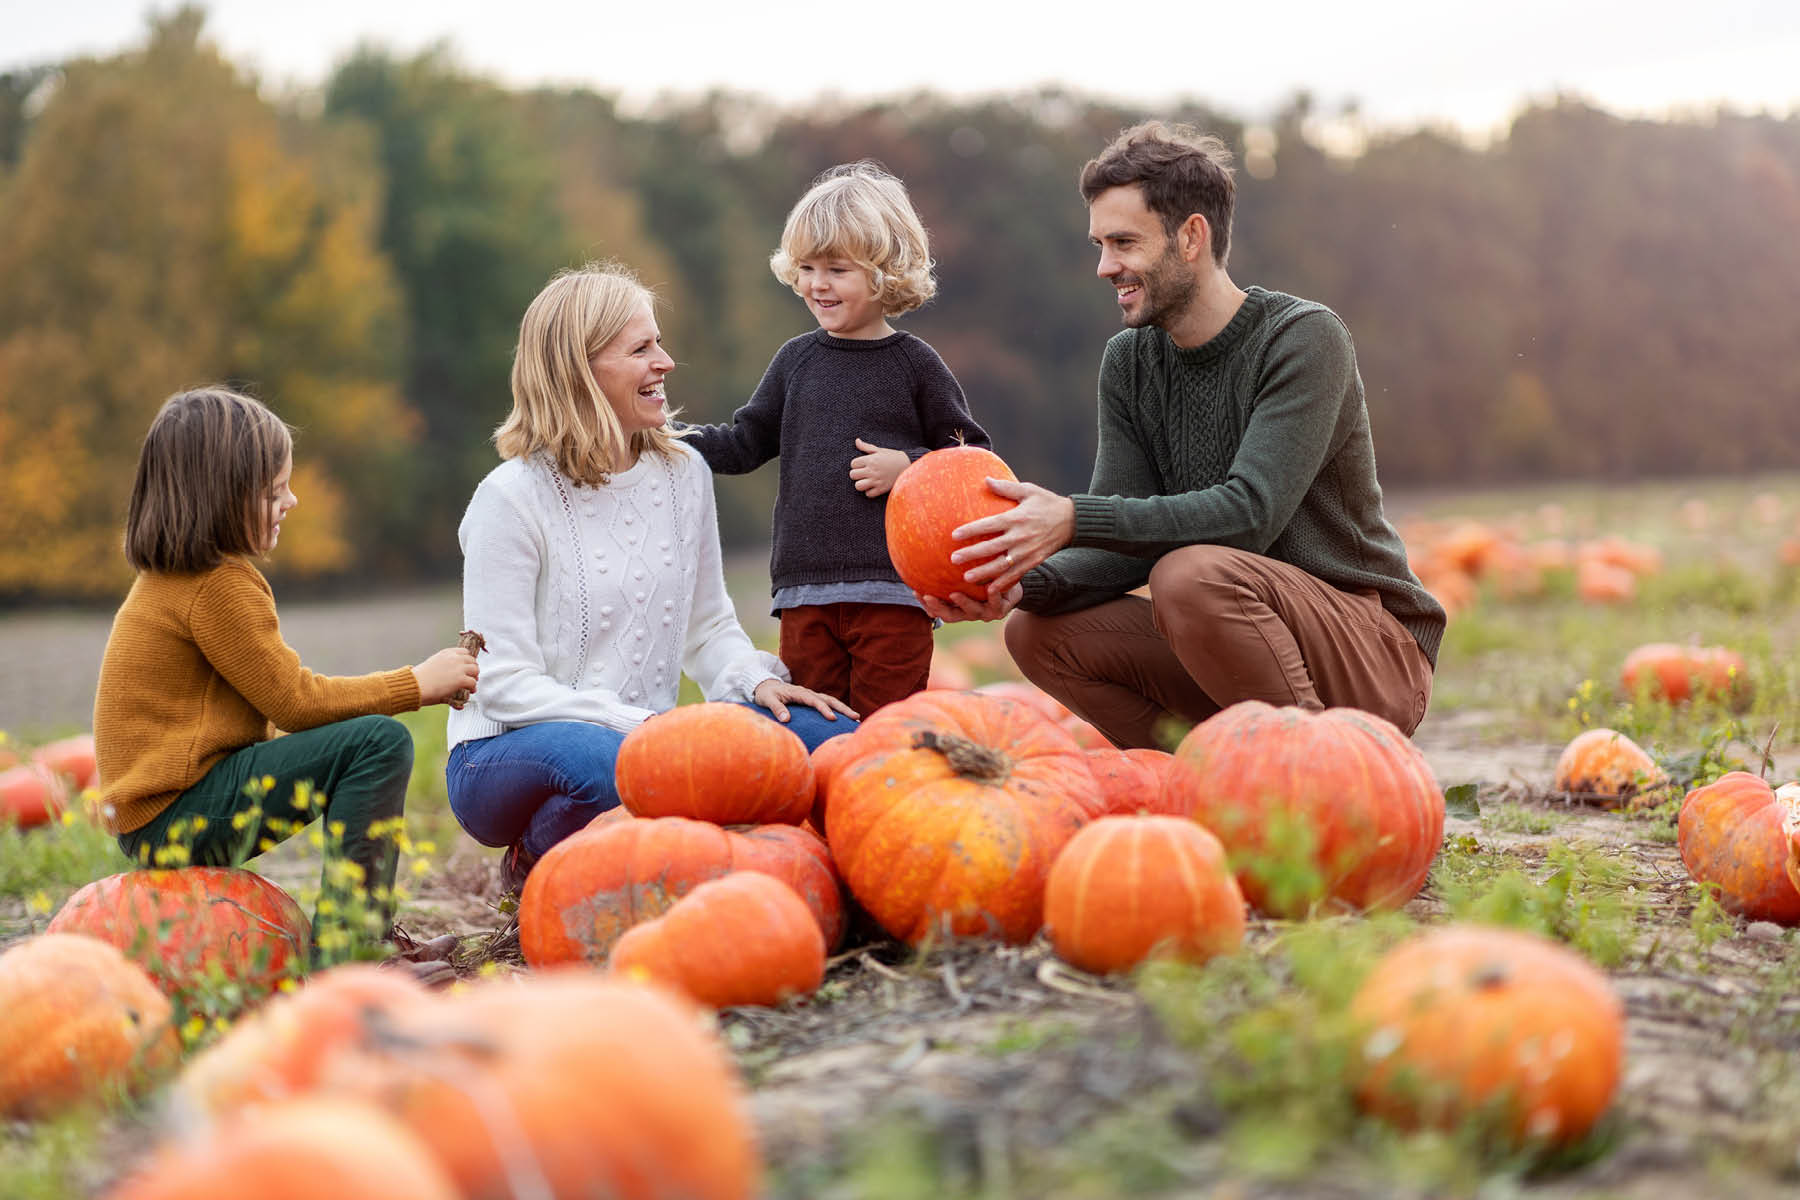 Fall routine tips - finding joy in the season